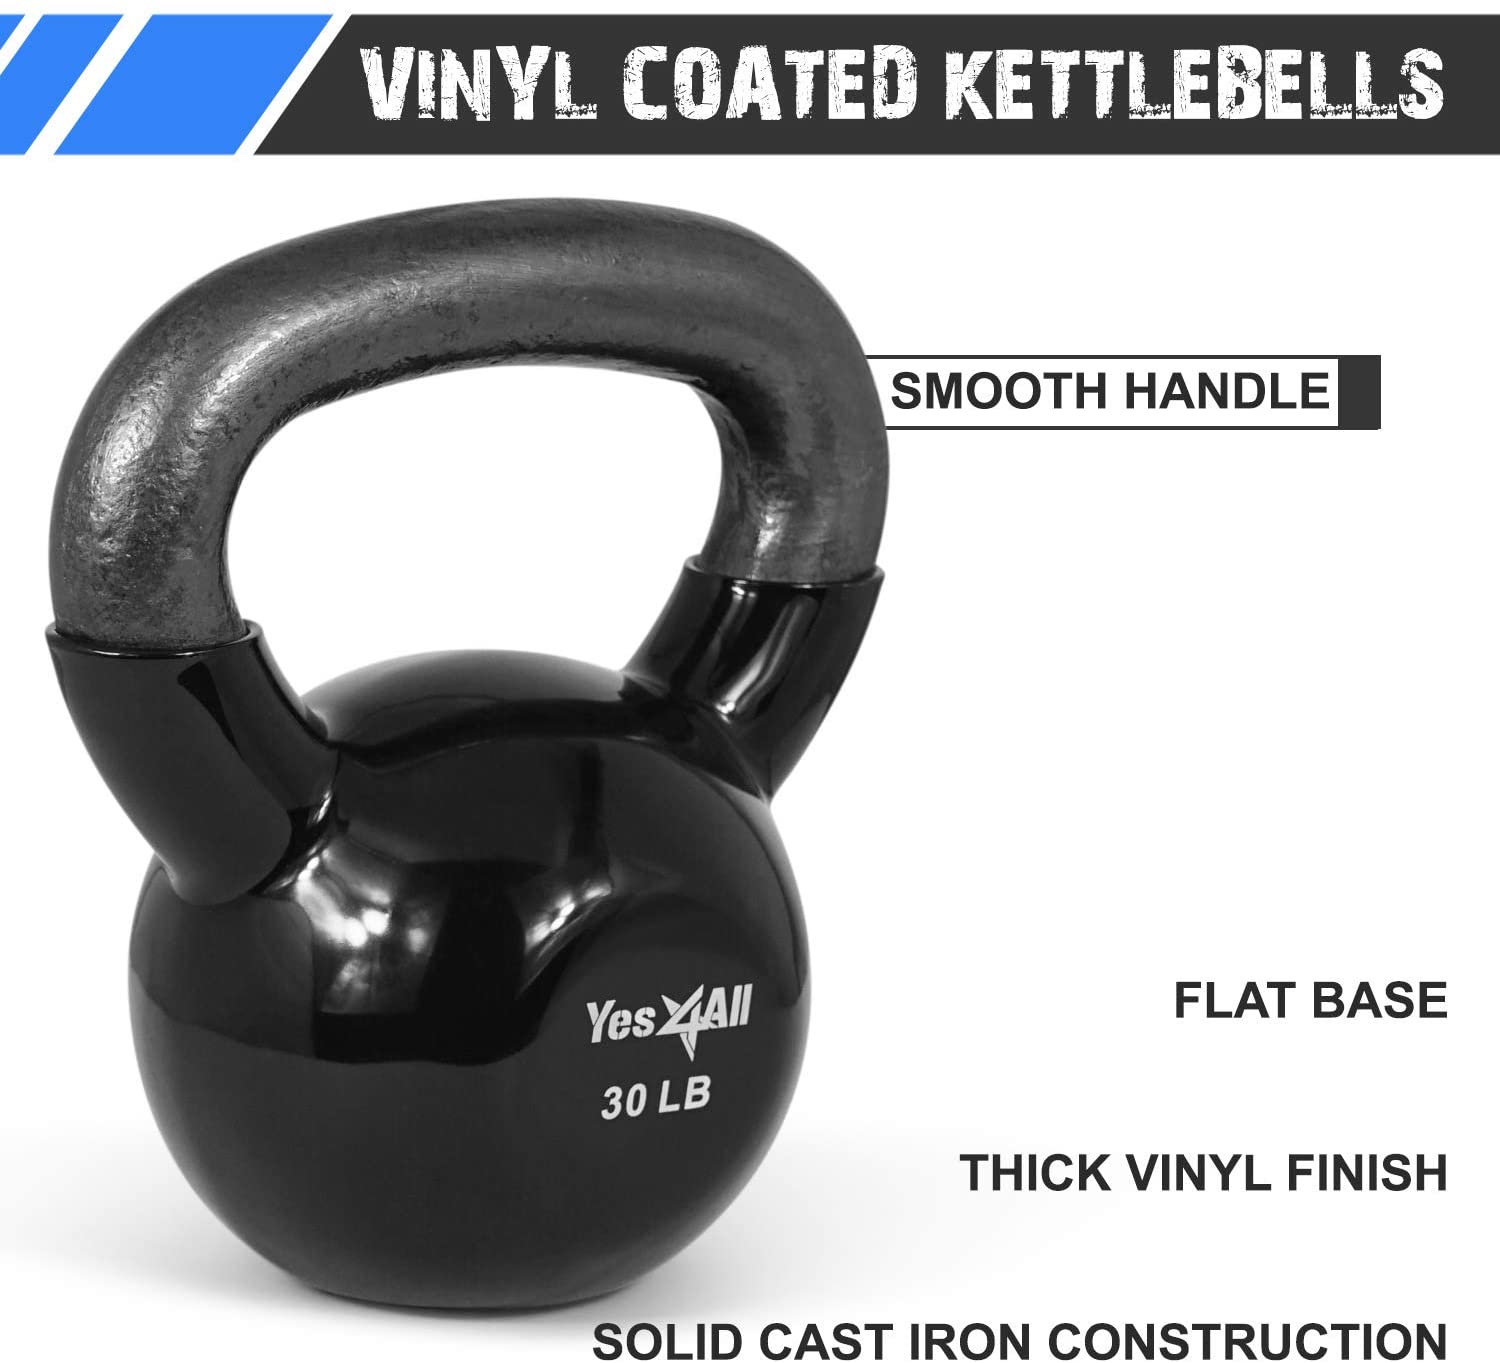 Yes4All 70 lb Vinyl Coated / PVC Kettlebell, Black, Combo / Set, Includes 10-25lb - image 5 of 8